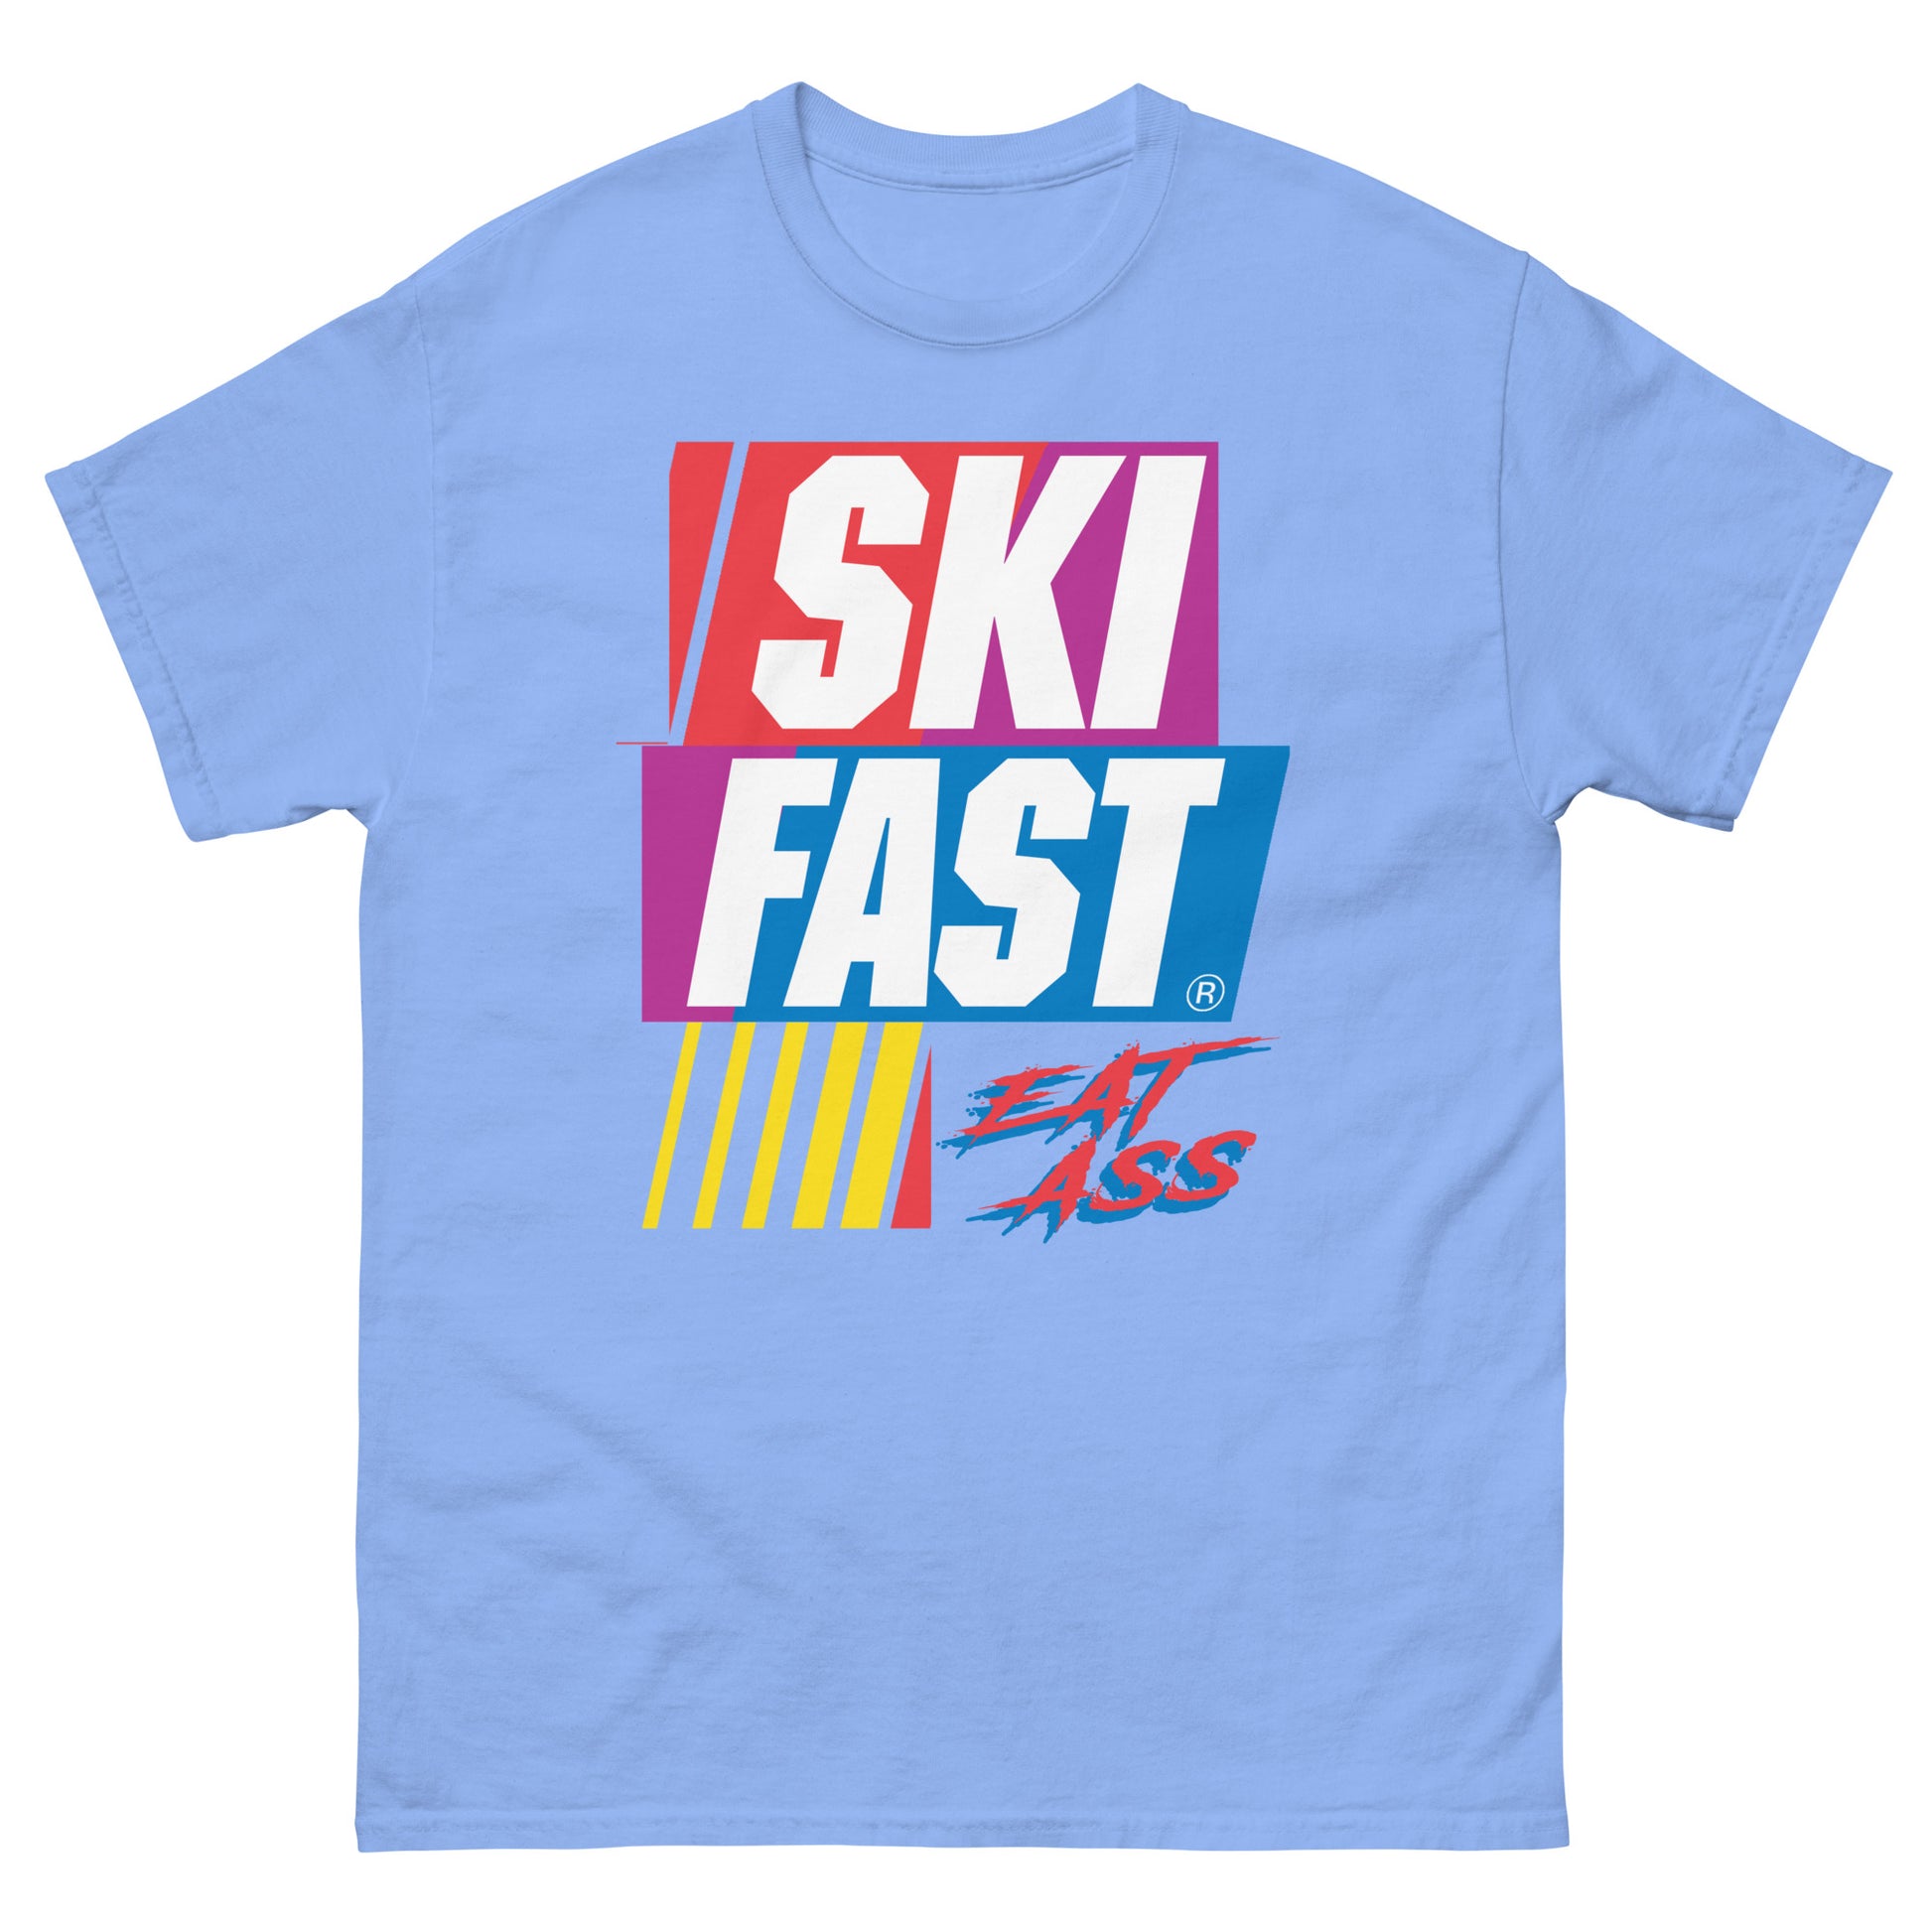 Ski fast eat ass printed on a t-shirt by Whistler Shirts